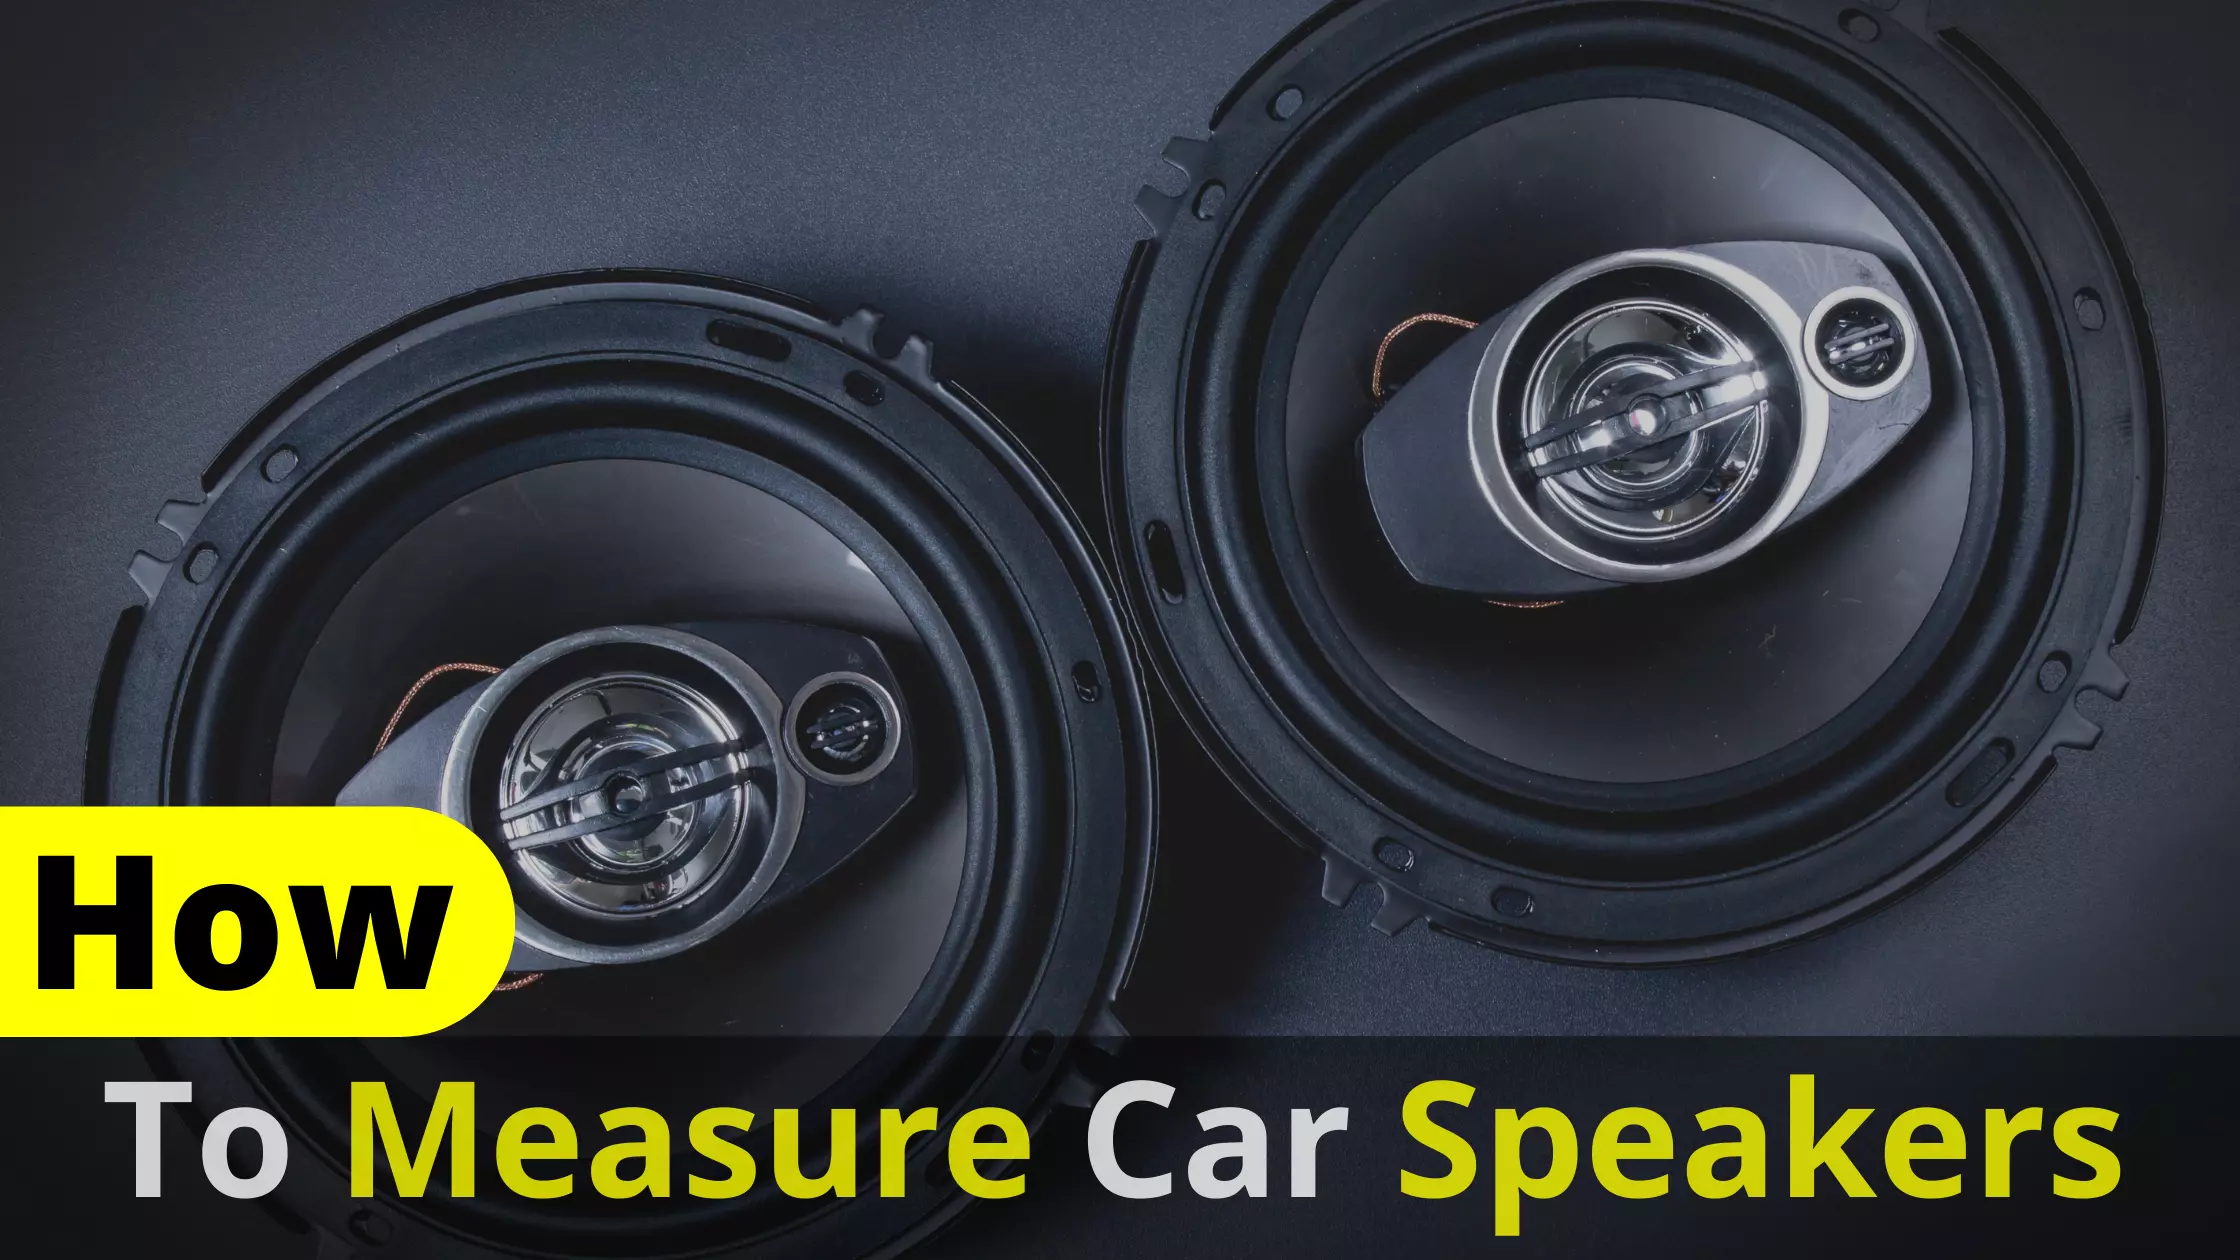 How To Measure Car Speakers?